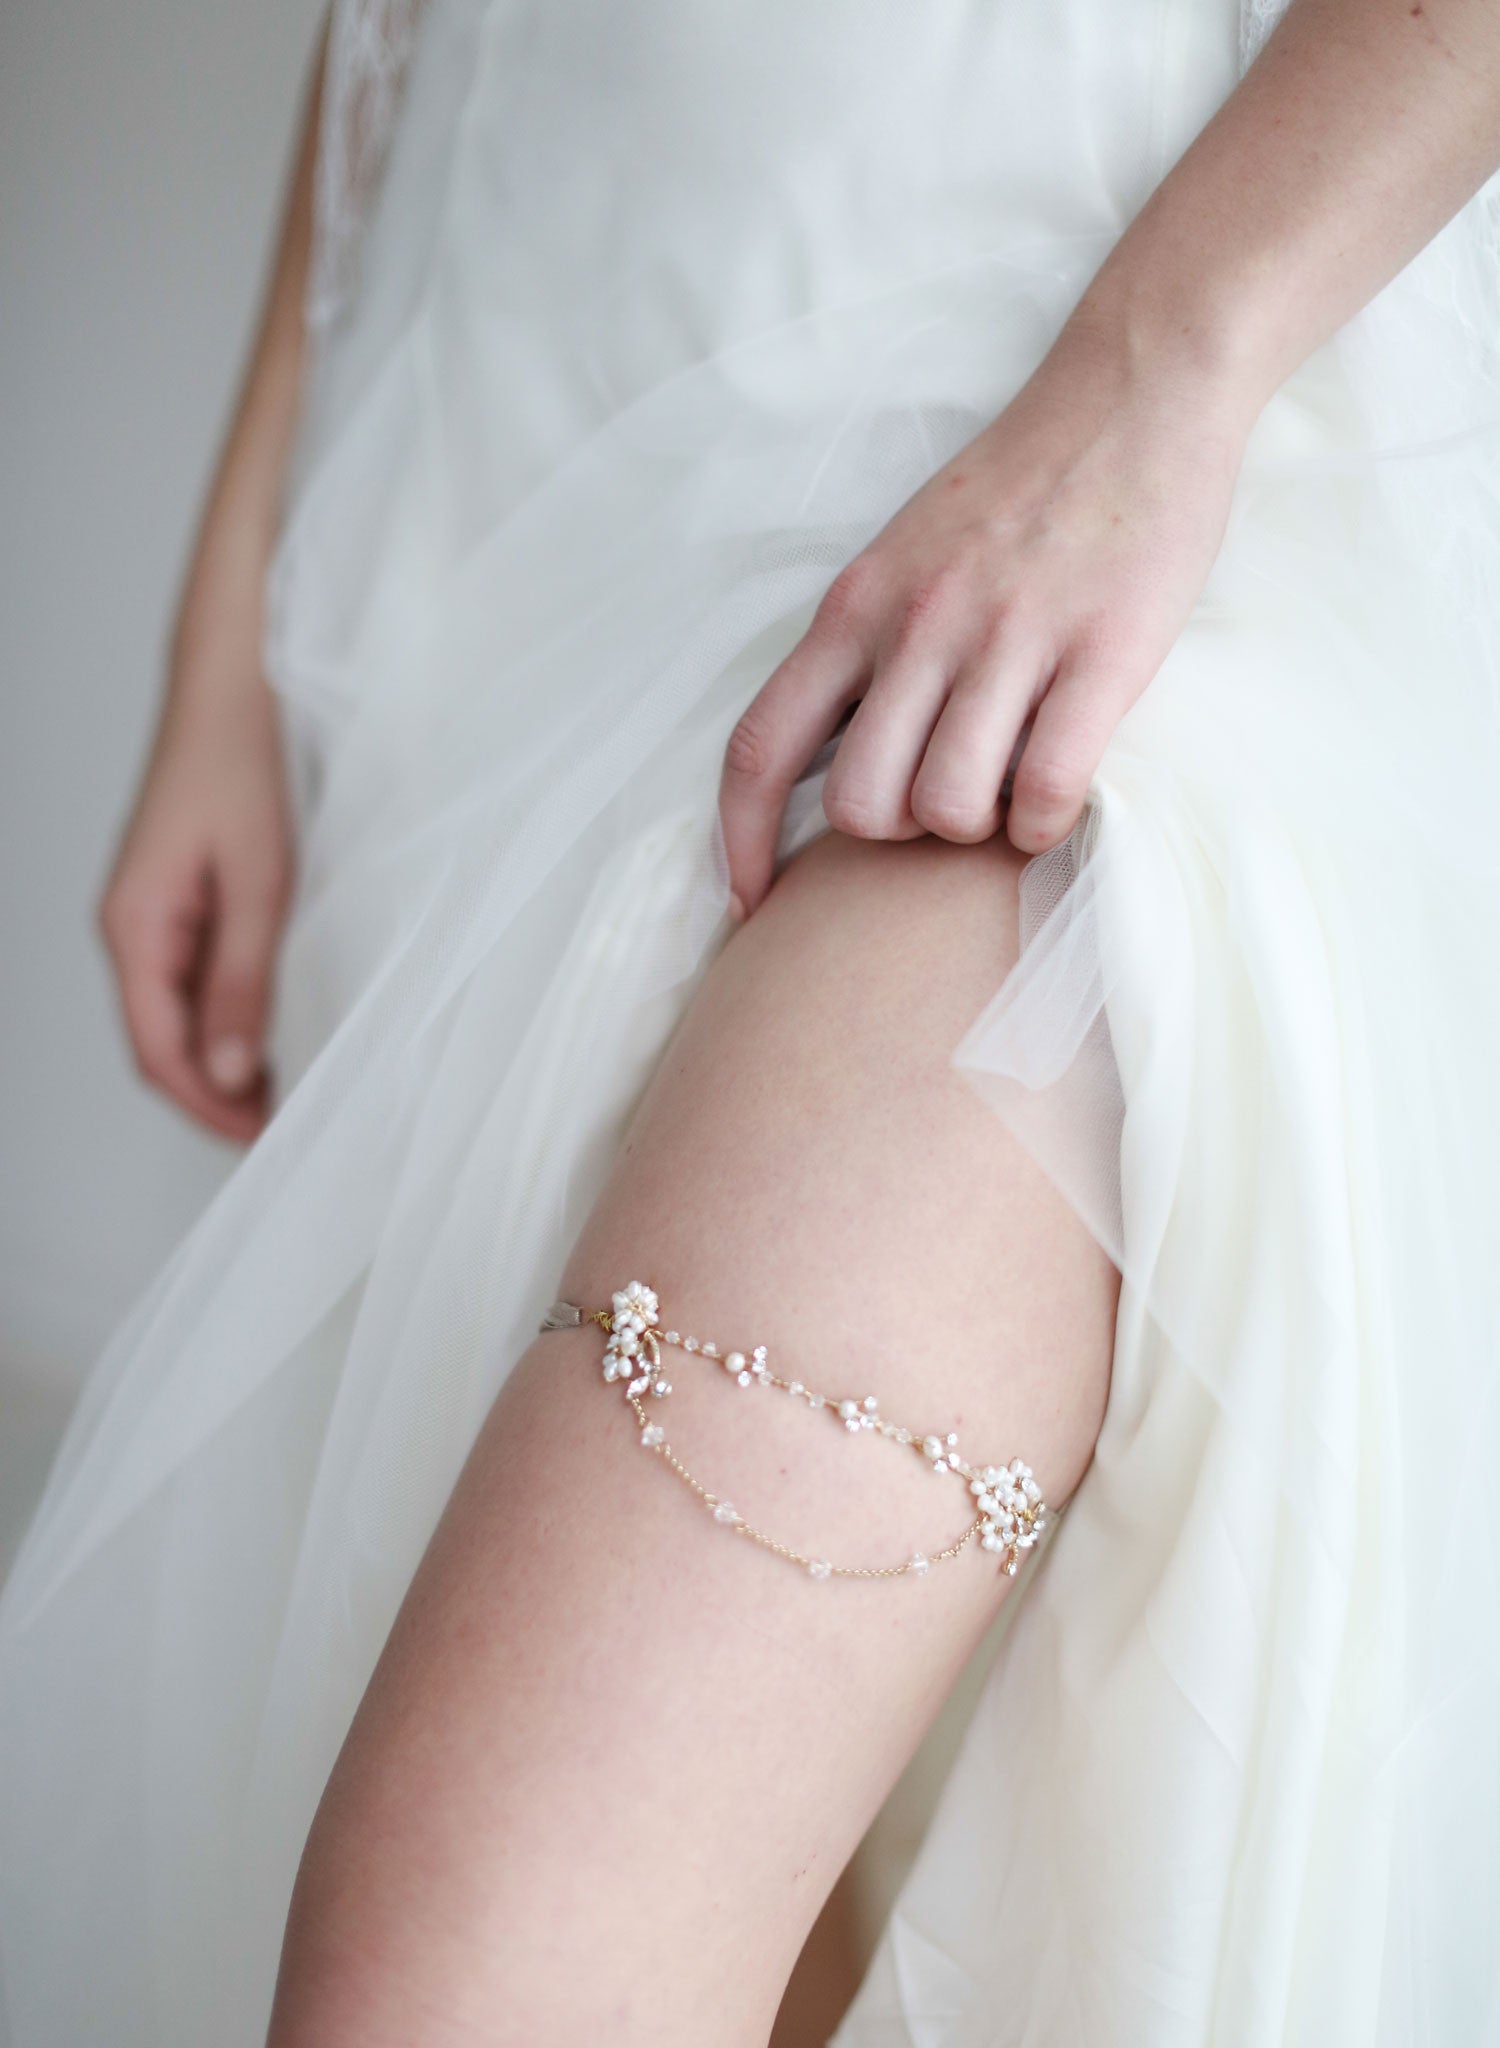 Lace Bridal Garter With Pearl Details Wedding Garter Set Bridal Garter Set